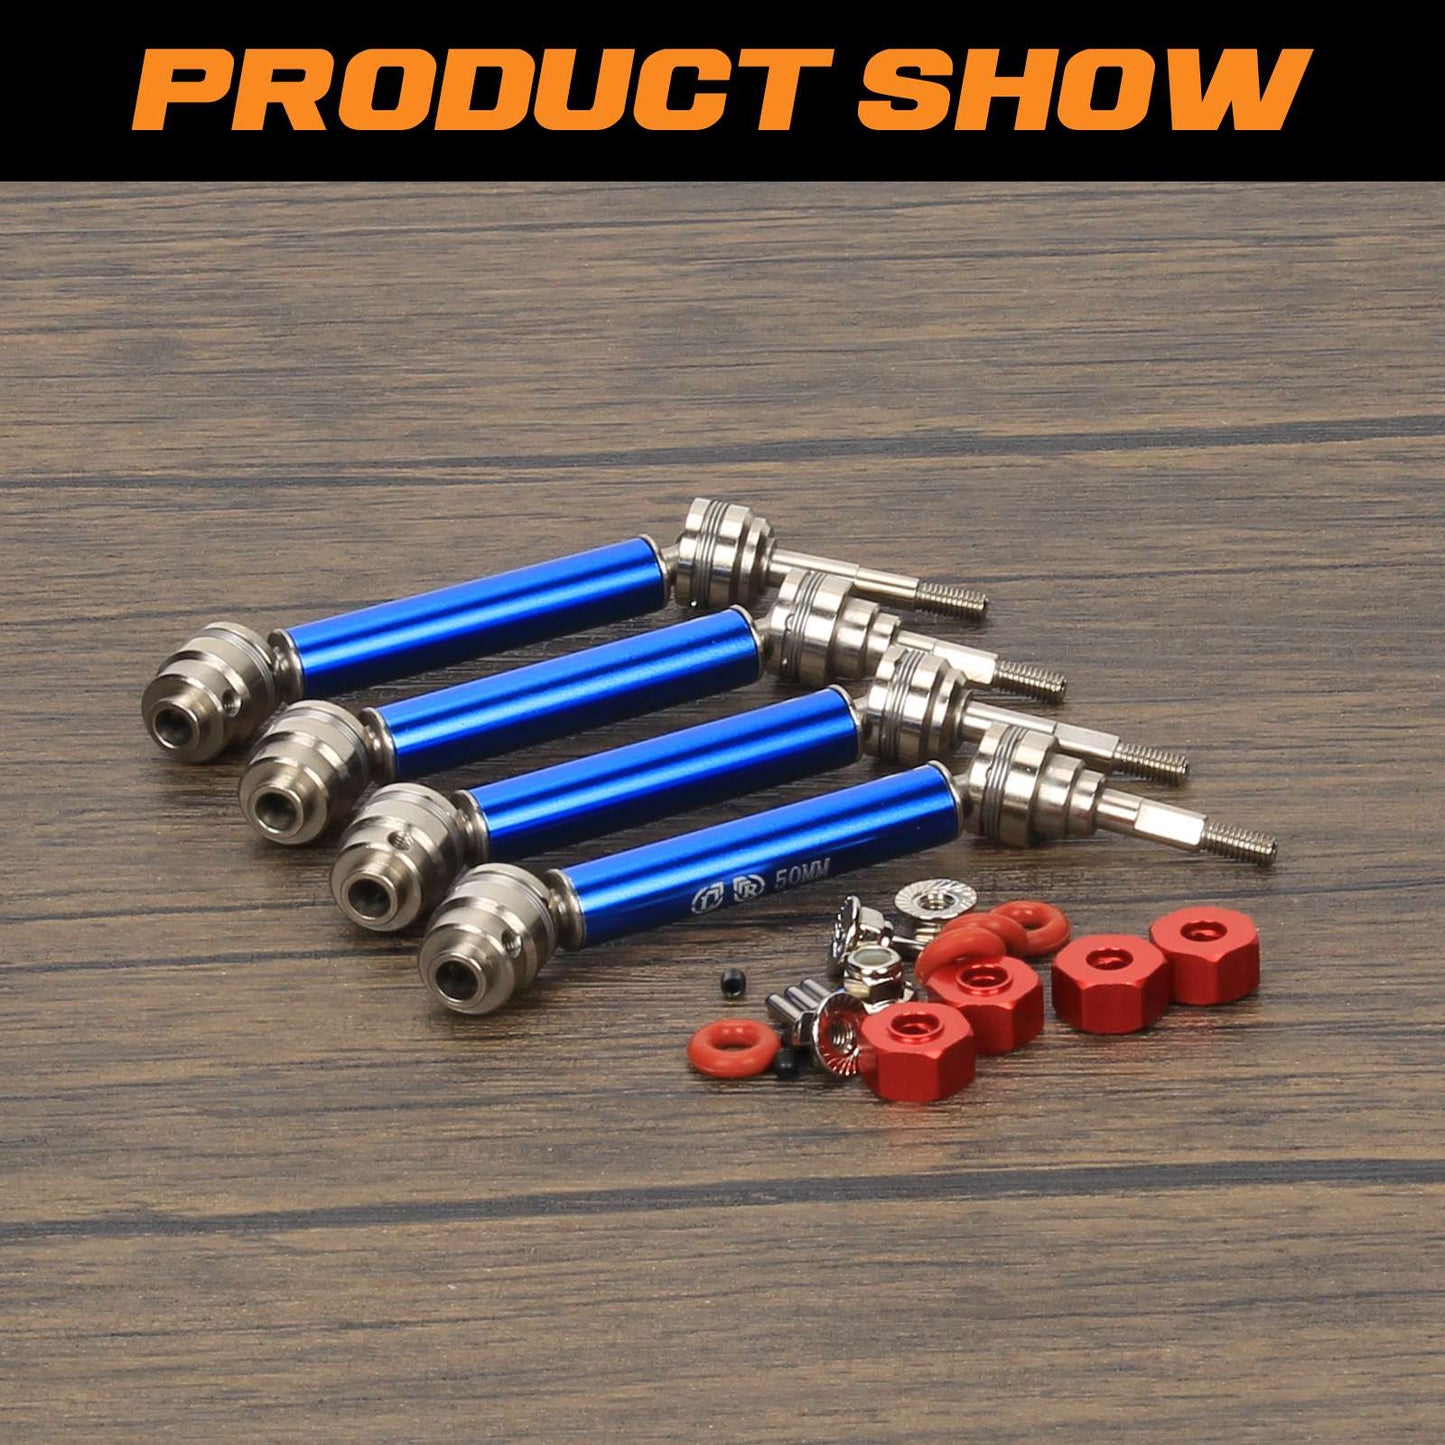 RCAWD TRAXXAS SLASH 4WD Blue / Both RCAWD RC CVD Drive Shafts Set with 12mm Hex for 1/10 Slash 4X4 Upgrades